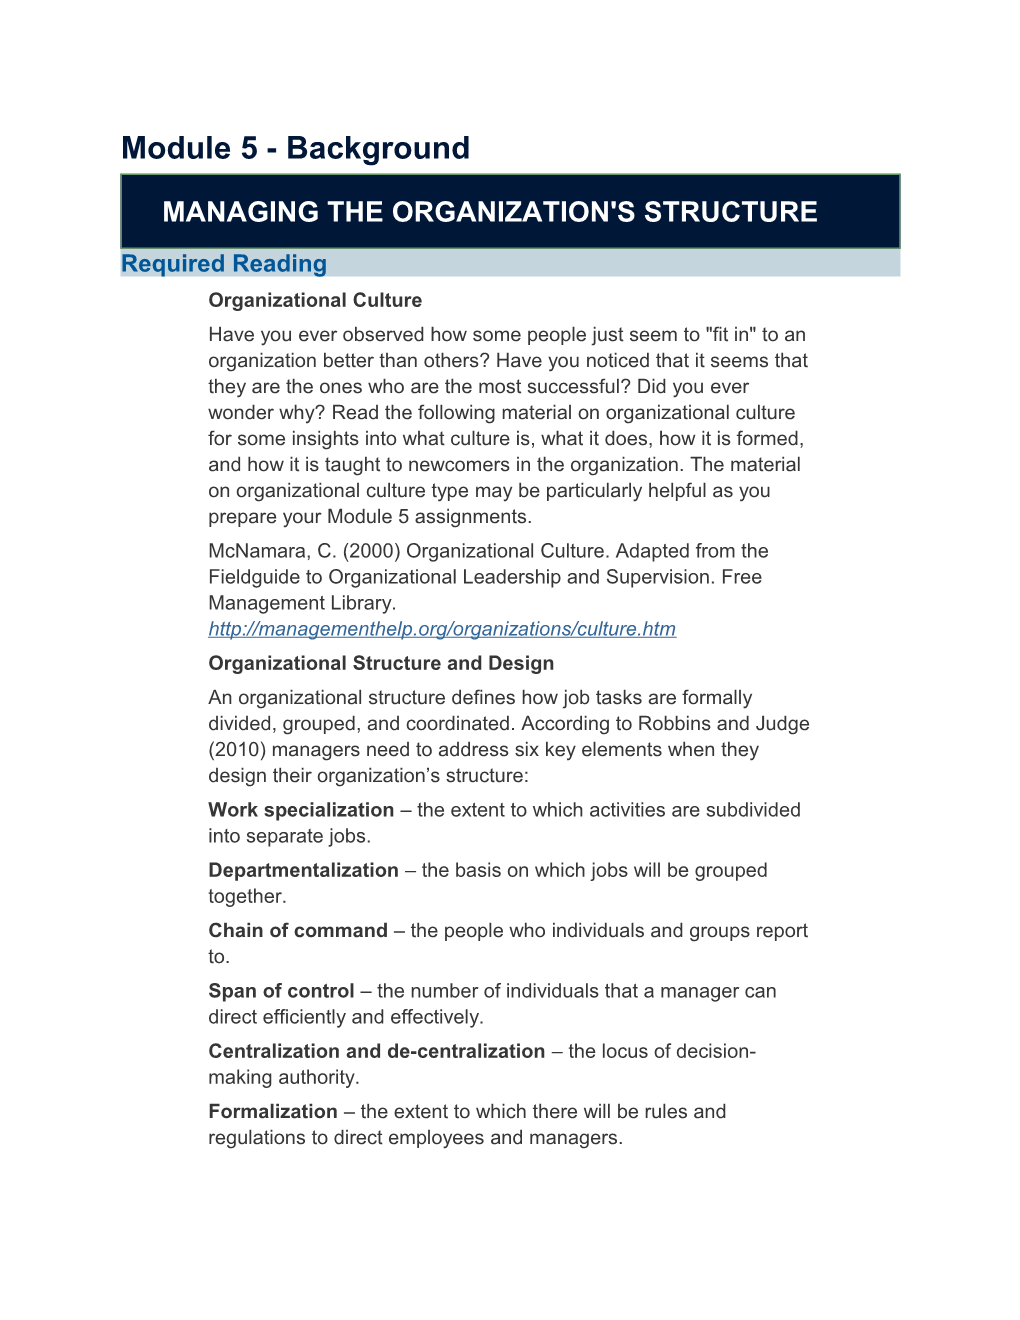 Managing the Organization's Structure